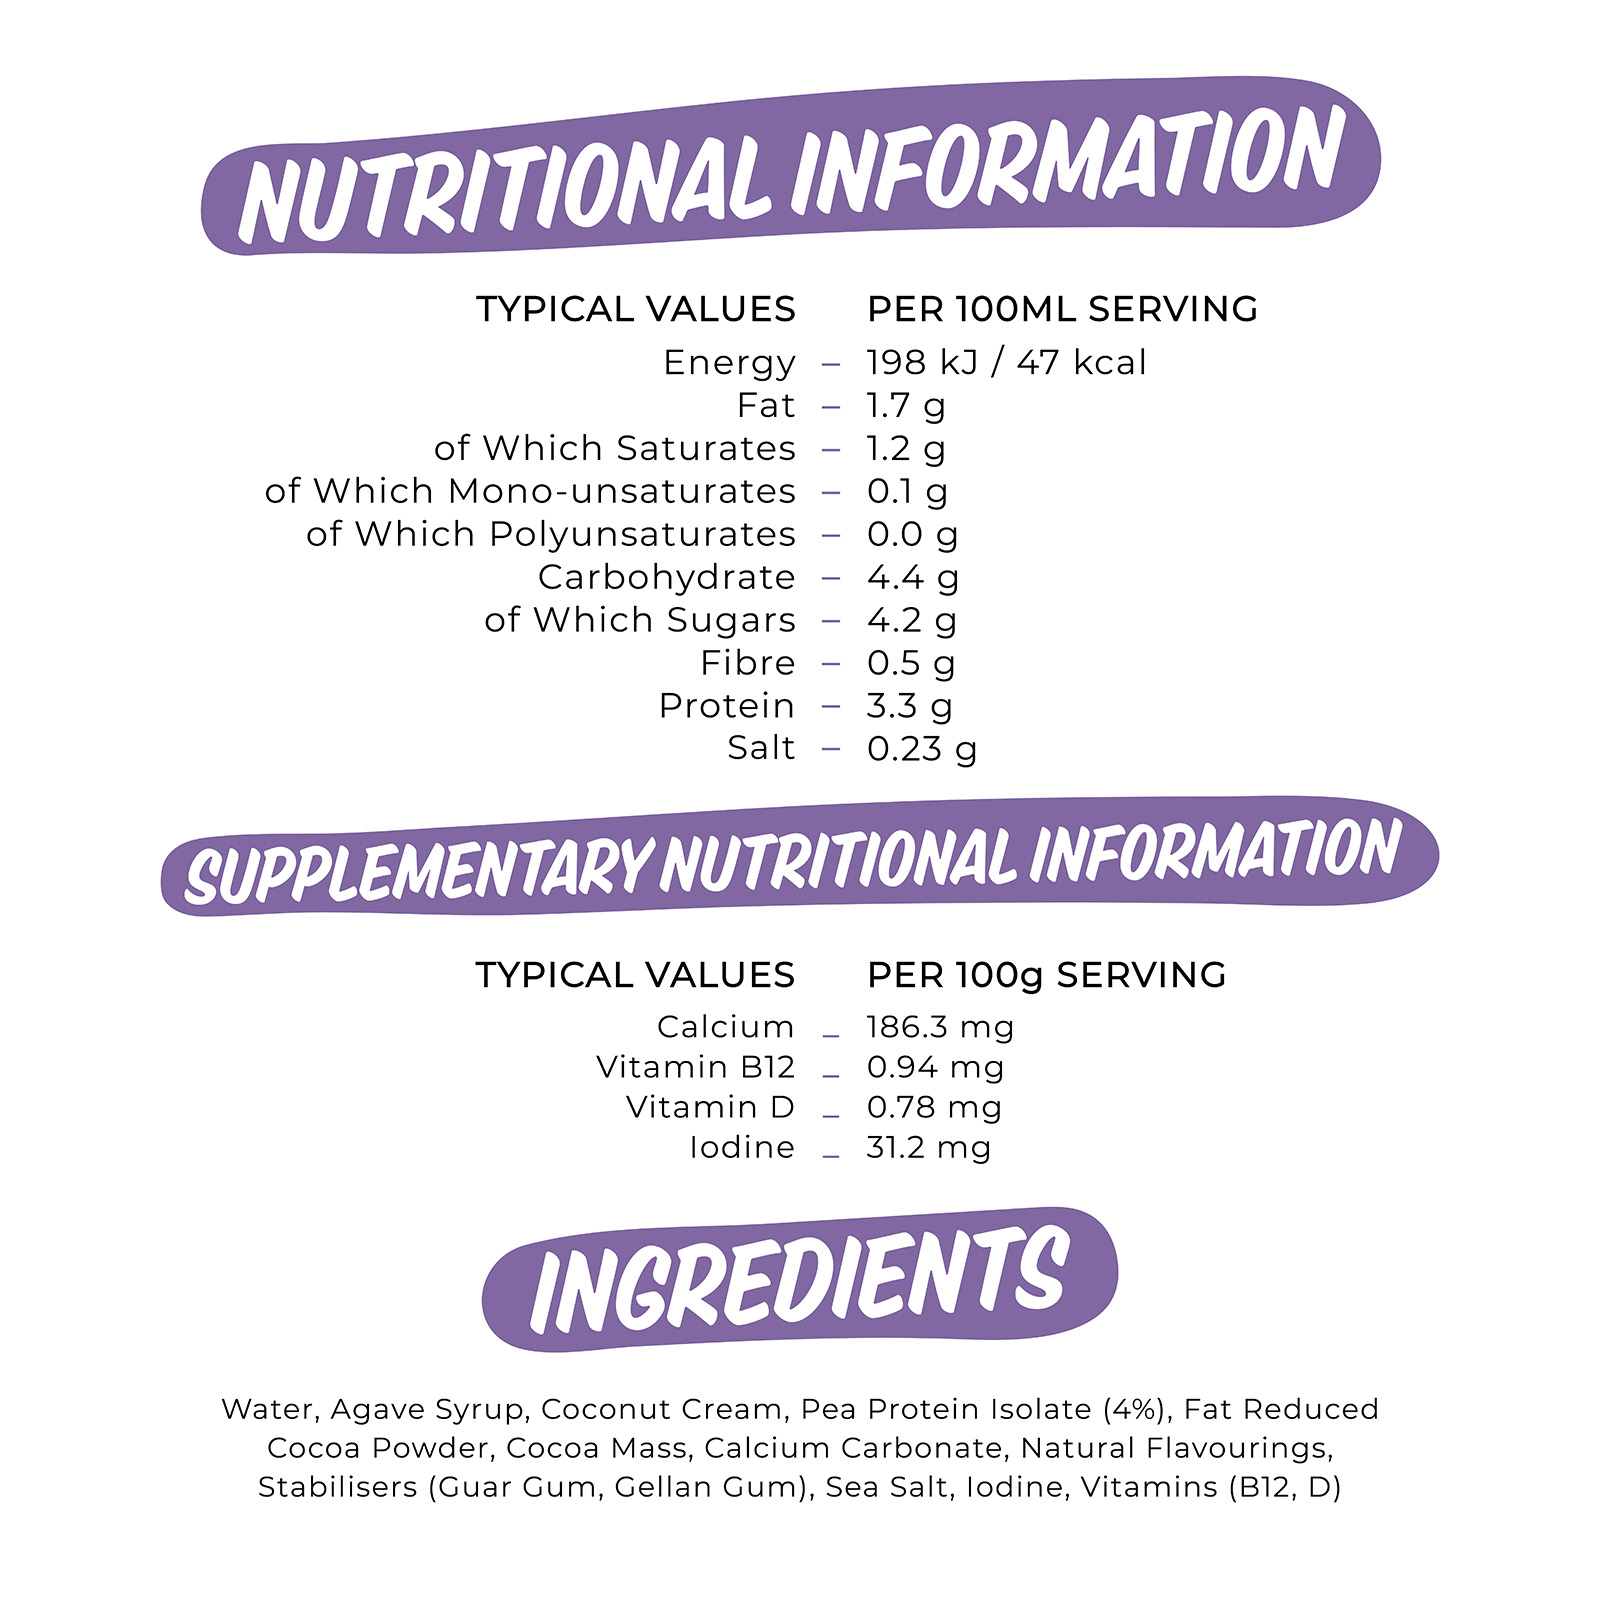 

                          TYPICAL VALUES PER 100ML SERVING Energy 198 kJ / 47 kcal Fat 1.7 g of Which Saturates 1.2 g of Which Mono-unsaturates 0.1 g of Which Polyunsaturates 0.0 g Carbohydrate 4.4 g of Which Sugars 4.2 g Fibre 0.5 g Protein 3.3 g Salt 0.23 g 
                          CUPPLEMENTARY NUTRITIONAL INFORMATION 
                          TYPICAL VALUES PER 100g SERVING Calcium _ 186.3 mg Vitamin B12 _ 0.94 mg Vitamin D _ 0.78 mg Iodine _ 31.2 mg 

                          Water, Agave Syrup, Coconut Cream, Pea Protein Isolate (4%), Fat Reduced Cocoa Powder, Cocoa Mass, Calcium Carbonate, Natural Flavourings, Stabilisers (Guar Gum, Gellan Gum), Sea Salt, Iodine, Vitamins (B12, D) 

                          